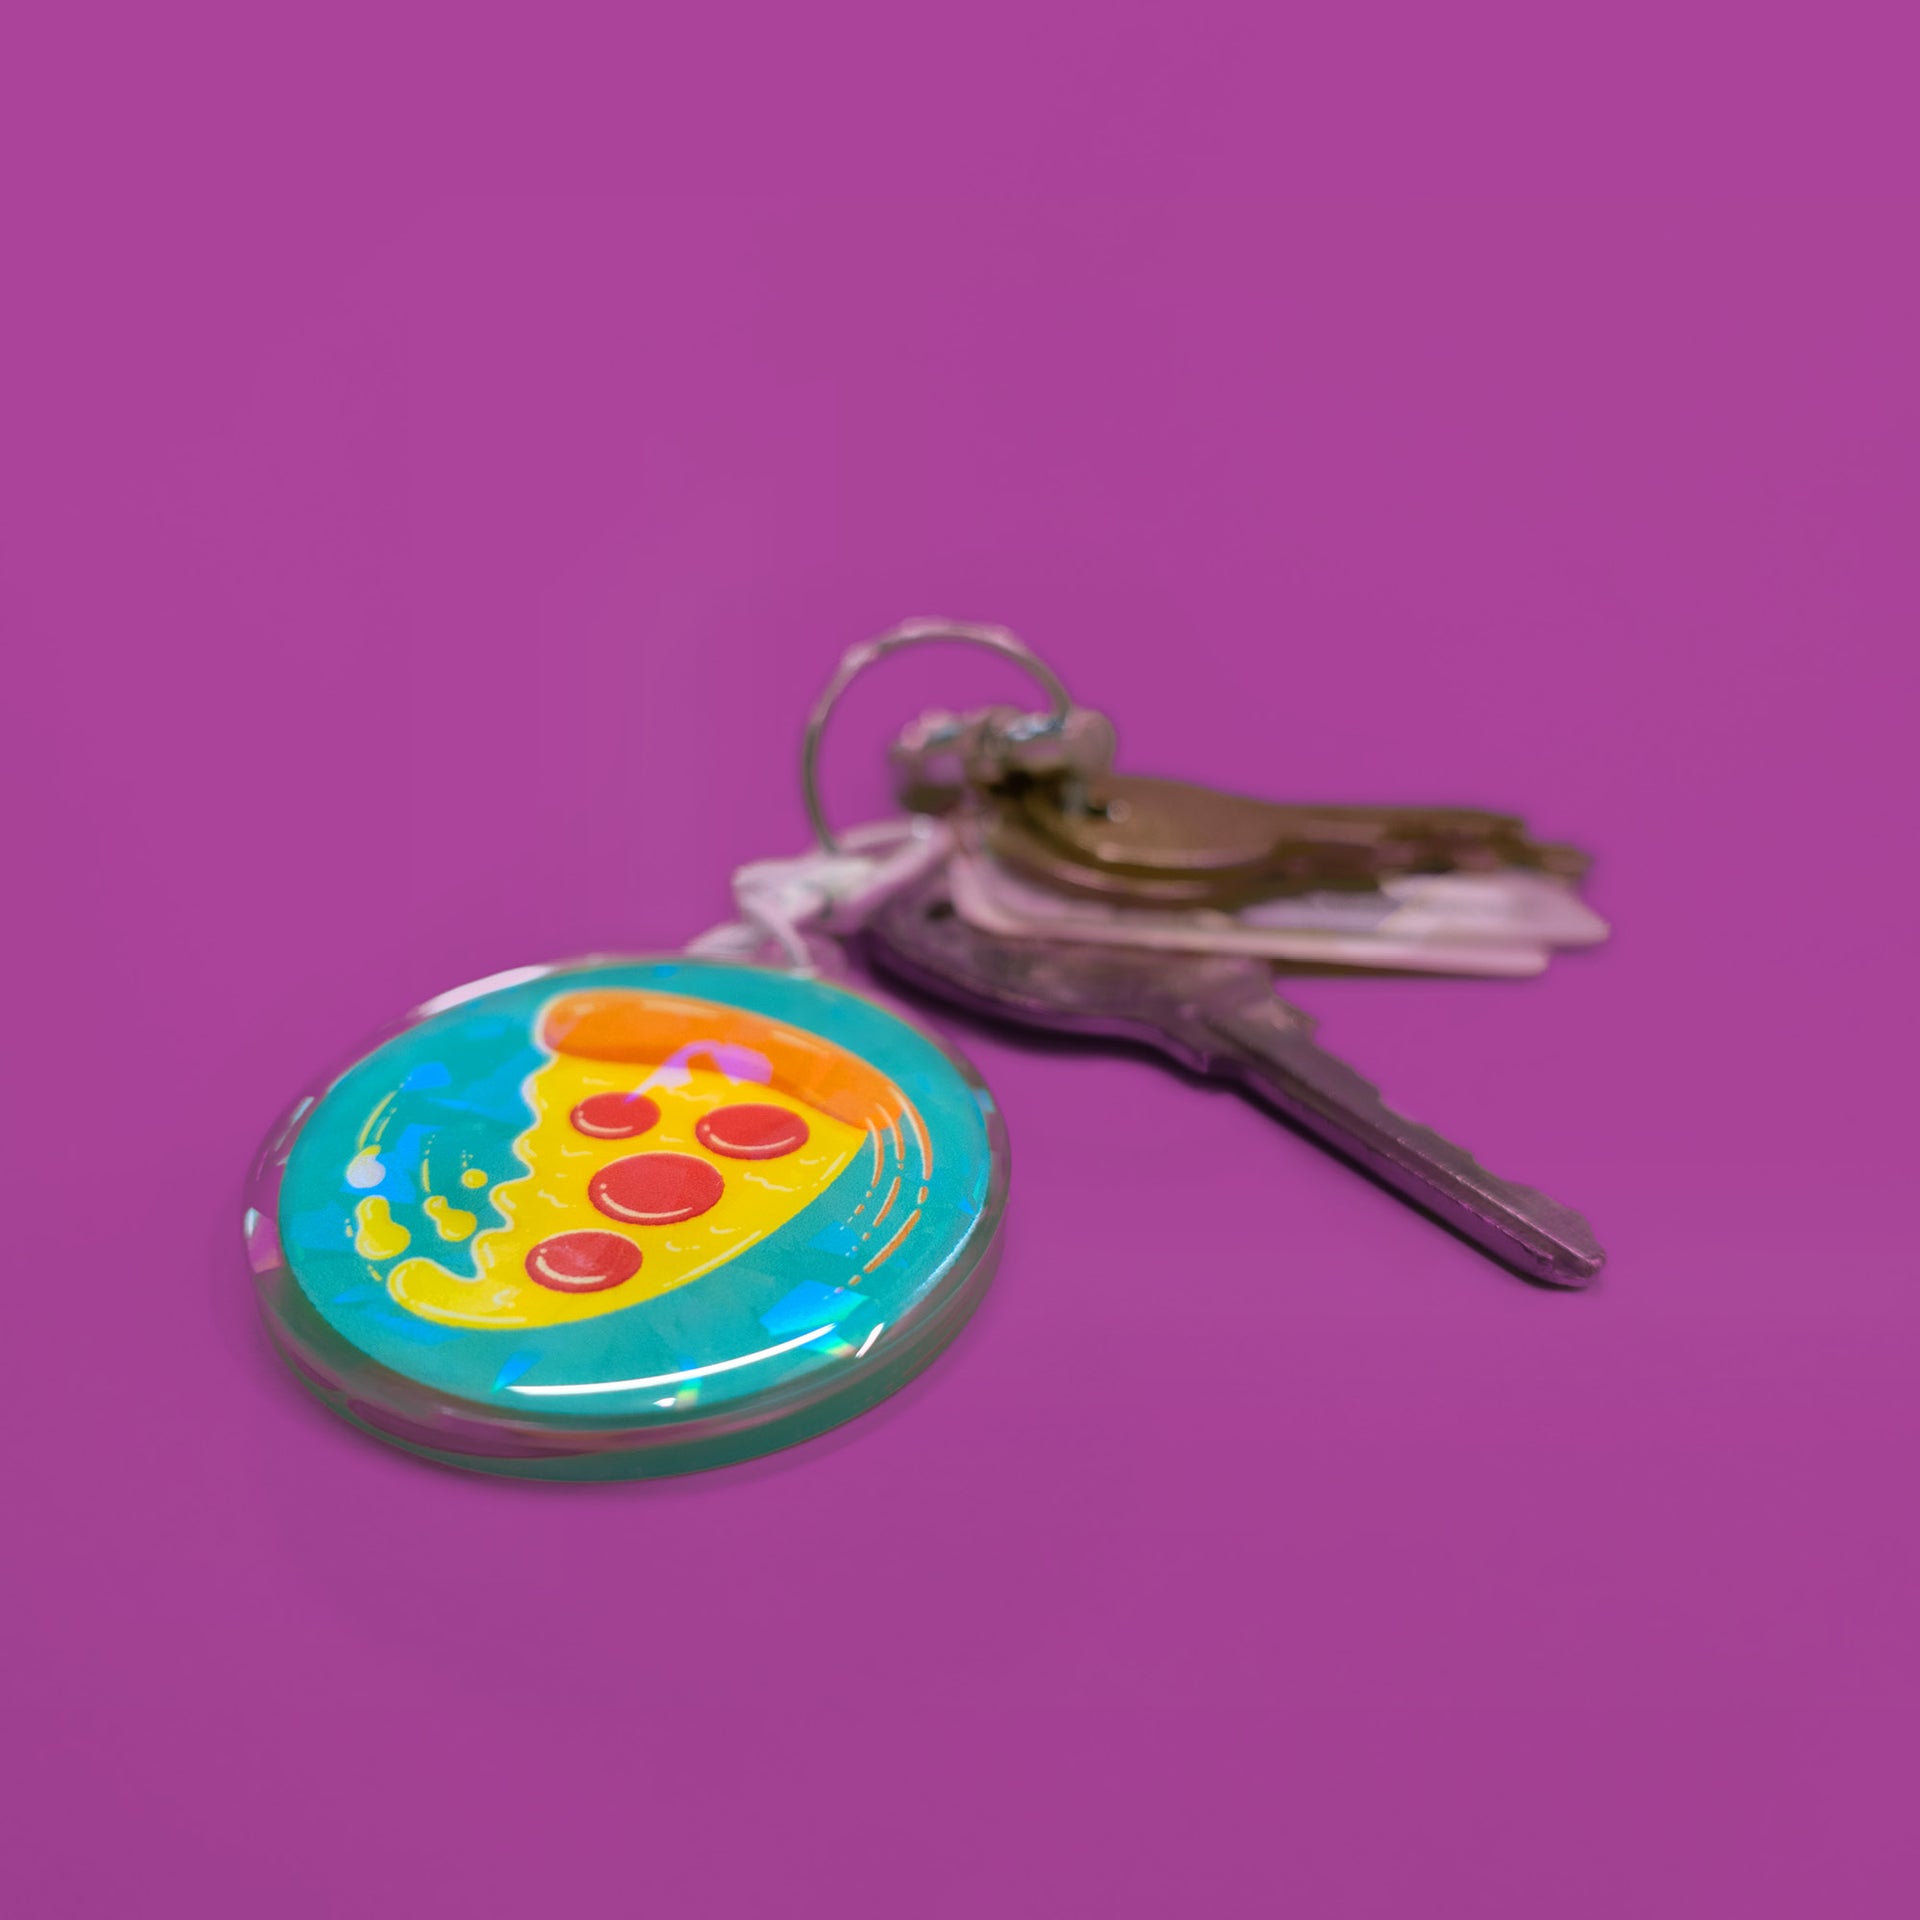 swirling pizza art on a circular holographic keychain with keys